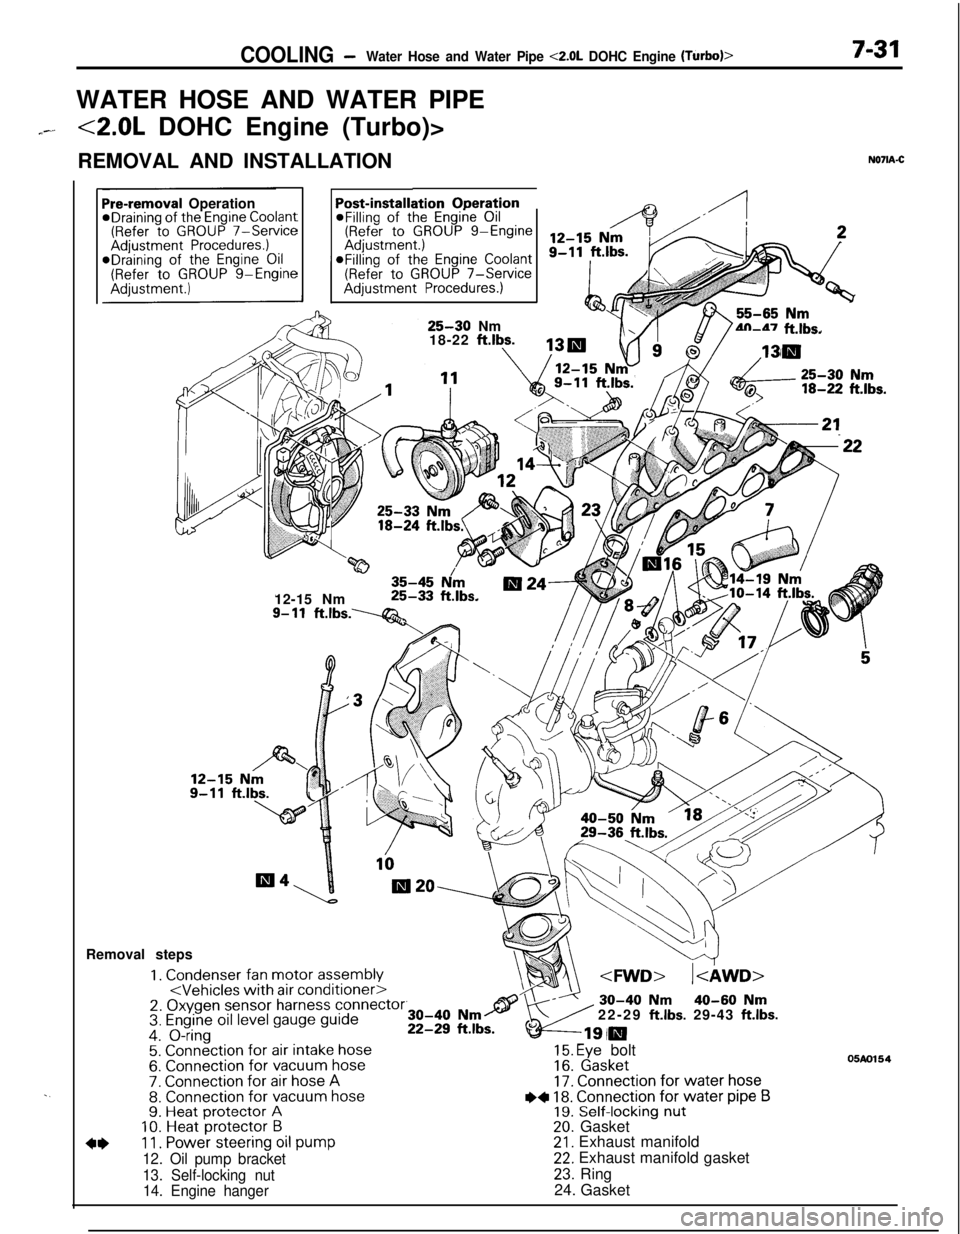 MITSUBISHI ECLIPSE 1991  Service Manual COOLING -Water Hose and Water Pipe <2.0L DOHC Engine (Turbo)>7-31WATER HOSE AND WATER PIPE
7--<2.0L DOHC Engine (Turbo)>
REMOVAL AND INSTALLATION
N071A-C
. .
ation OperationPost-installi@Filling of th